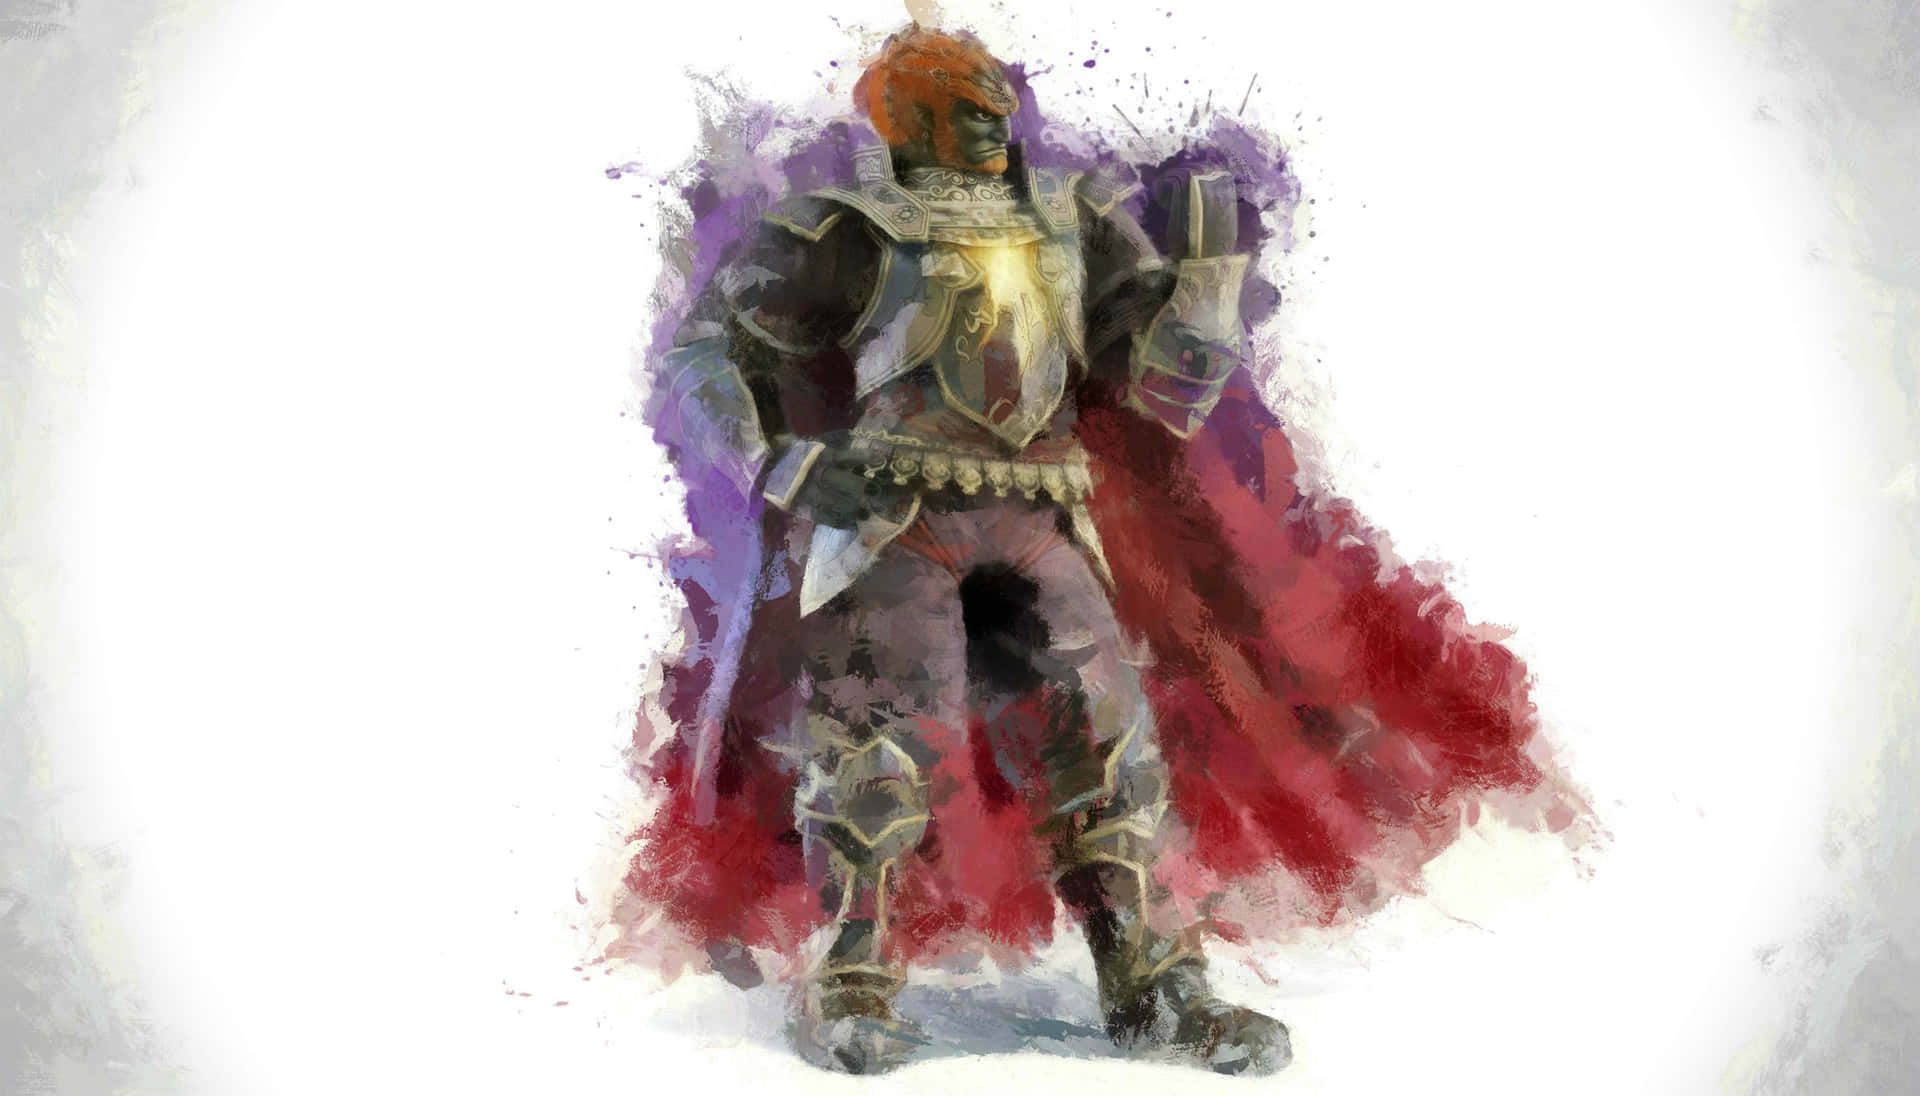 The Mighty Ganondorf unleashed in a powerful pose Wallpaper